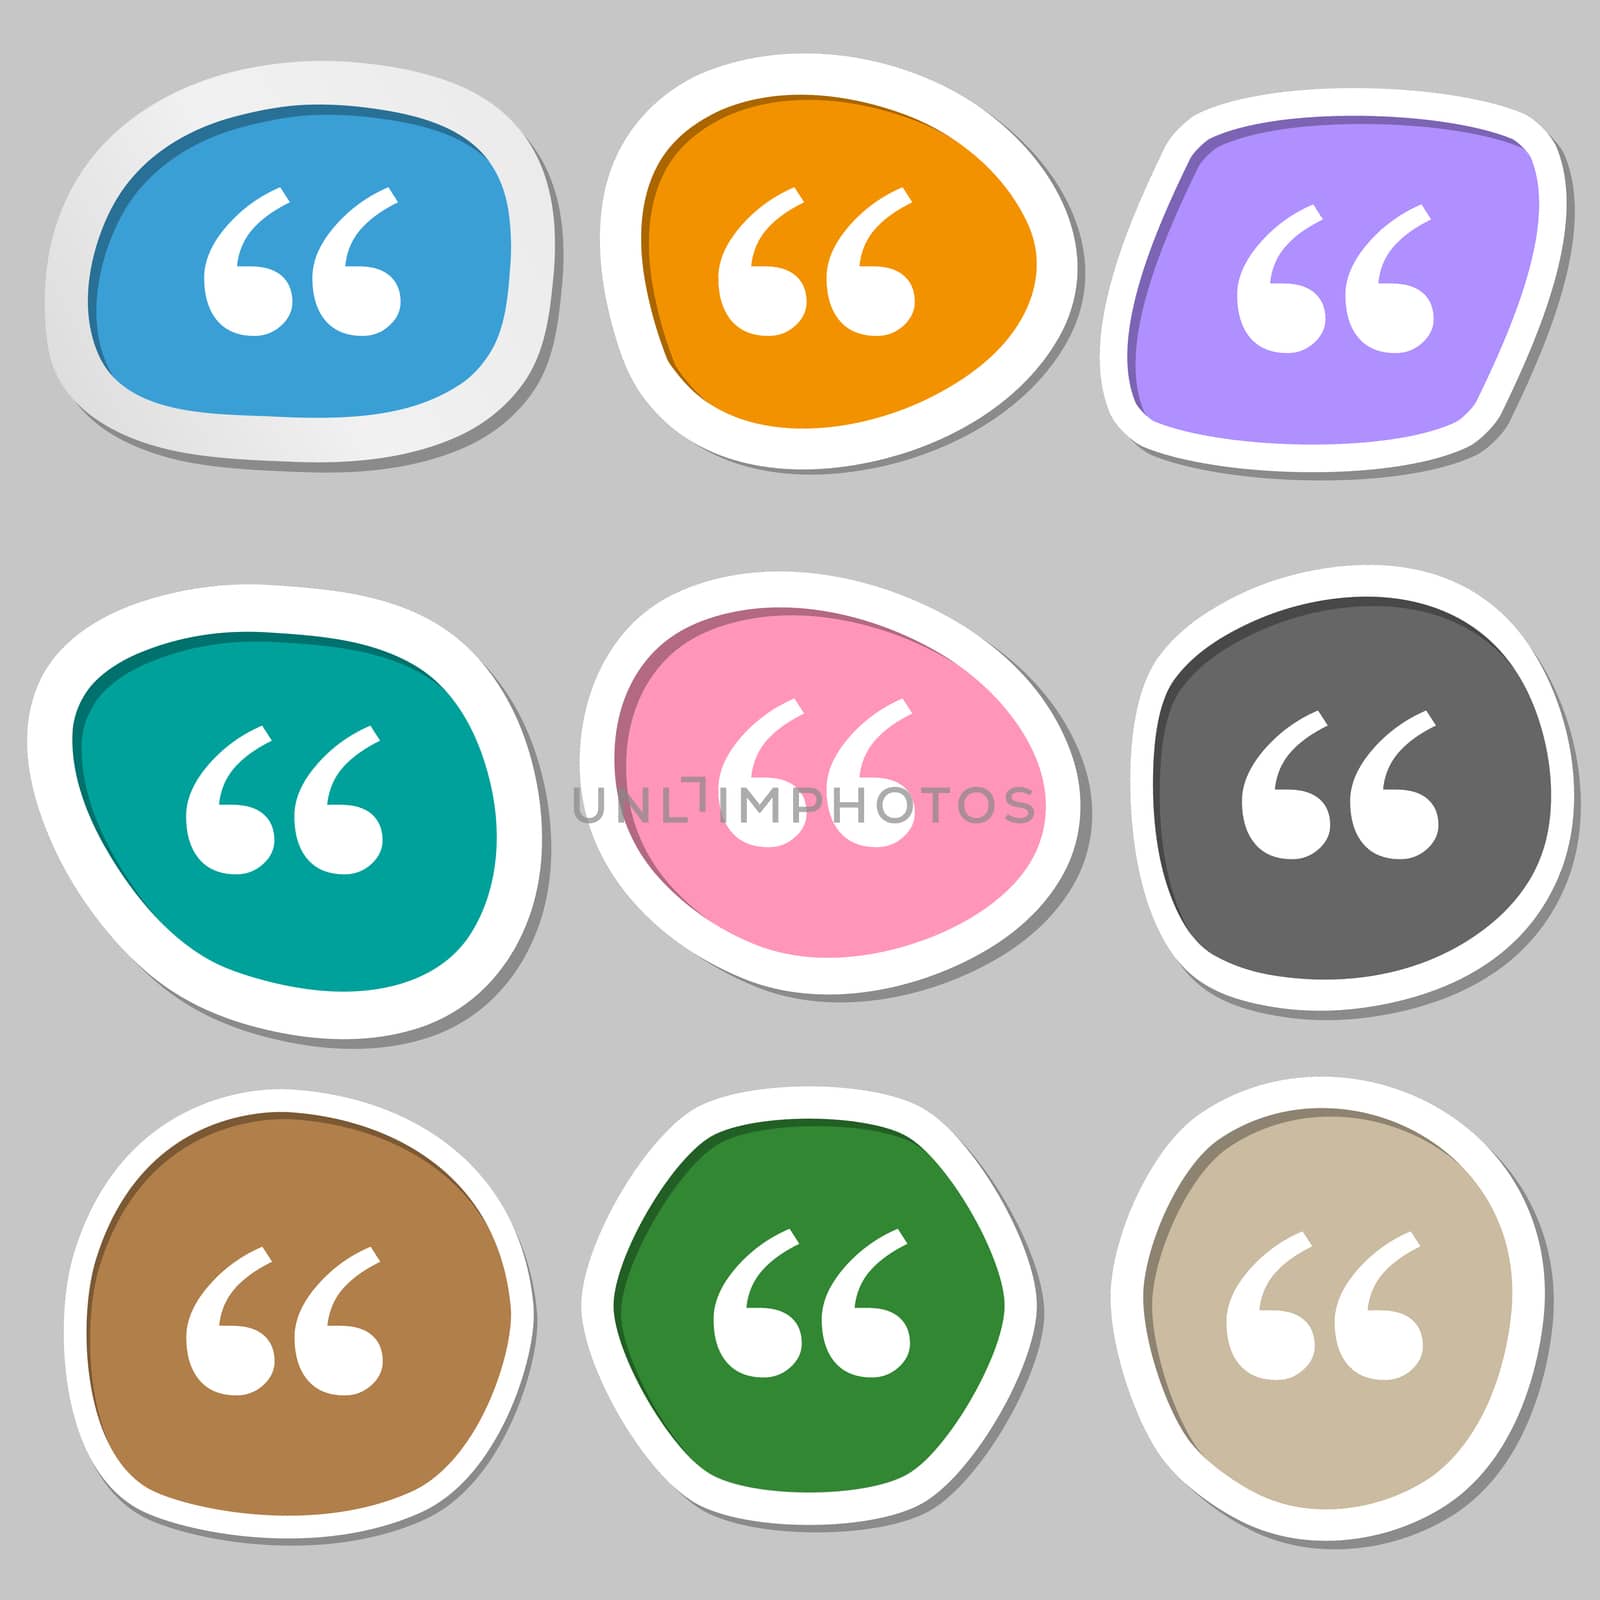 Double quotes at the beginning of words icon symbols. Multicolored paper stickers. illustration